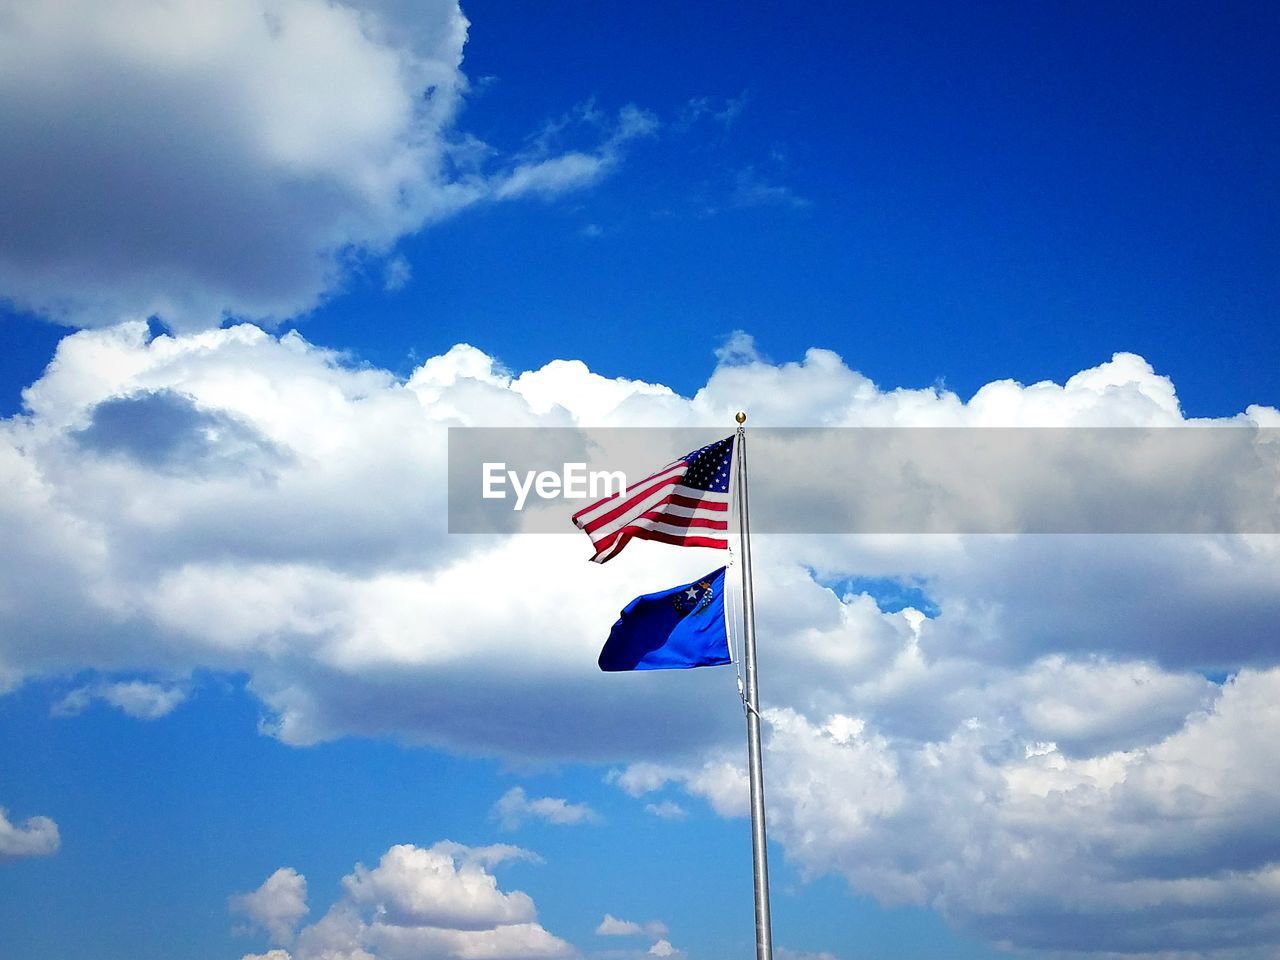 Country flag above state flag in the blue sky